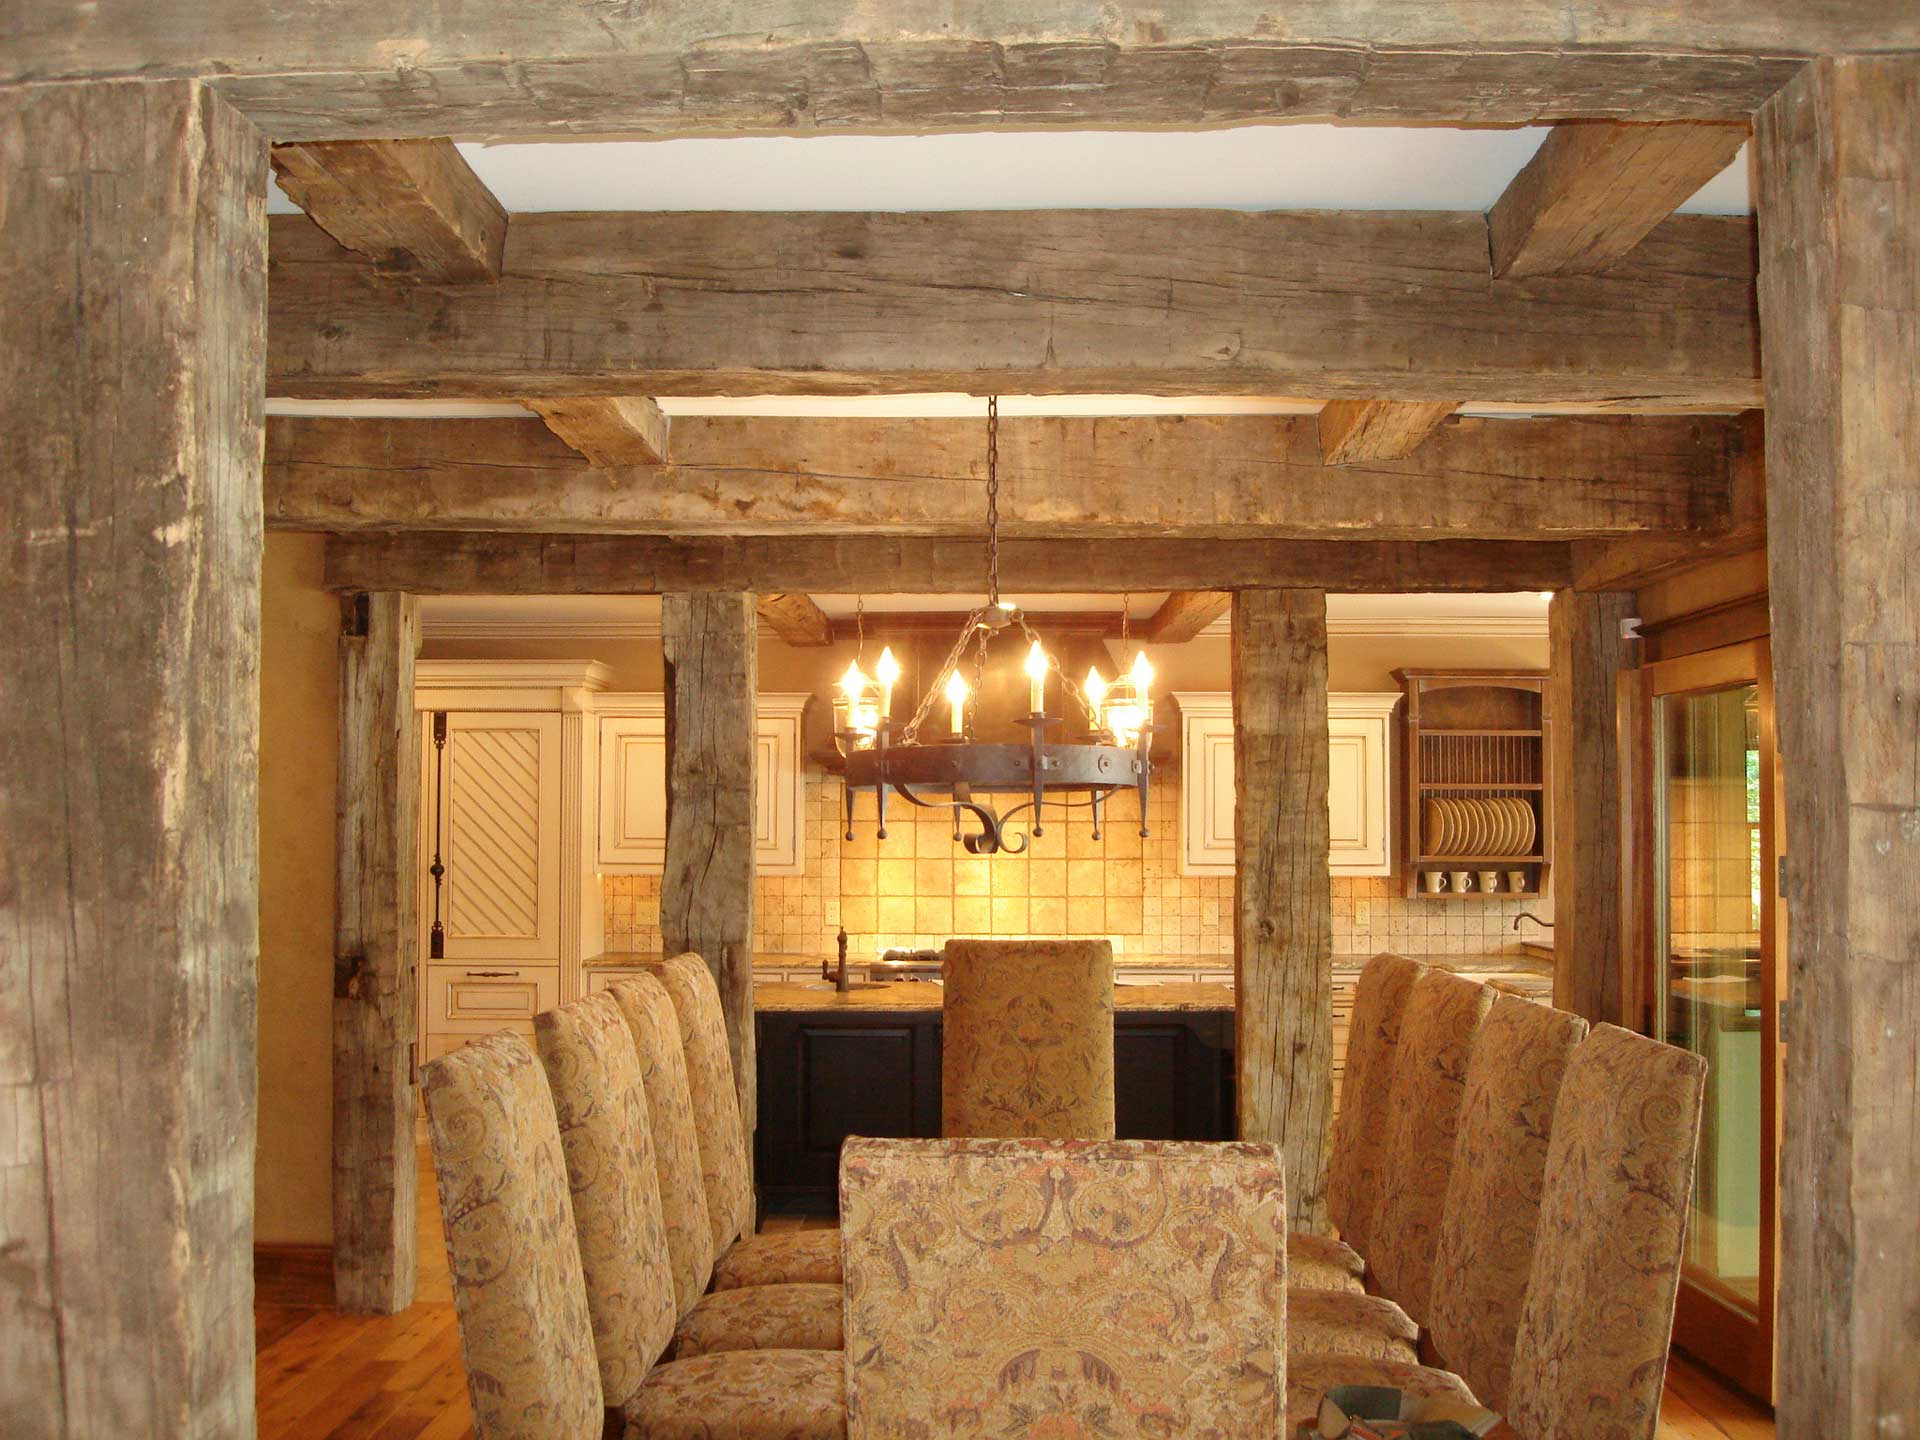 Photo of Brauner project, Interior dining space with exposed wooden beams